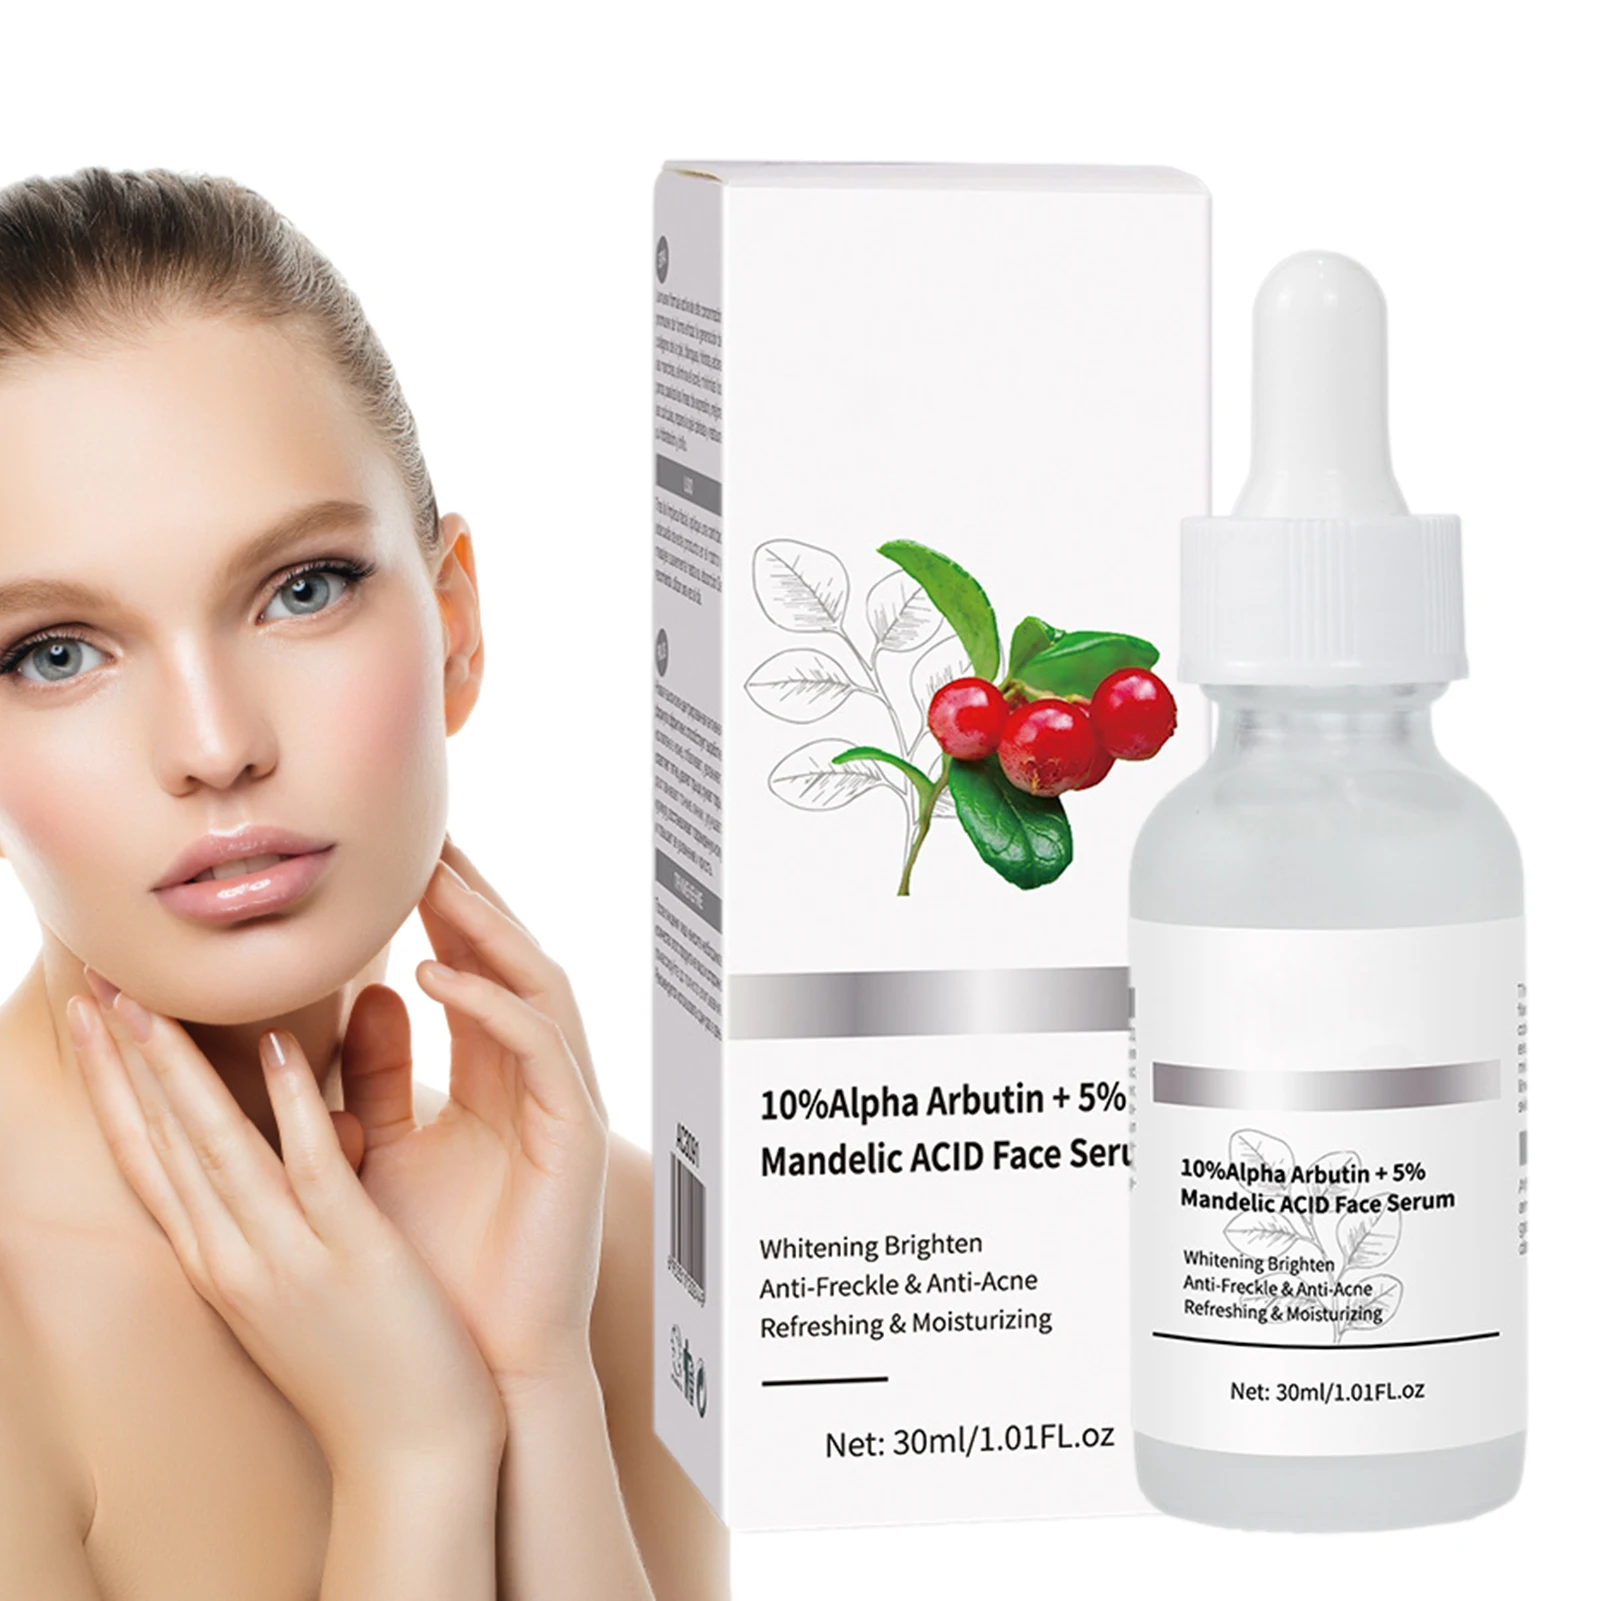 

30ml Arbutin Mandelic Acid Essence Whitening Essence With Natural Ingredients For Face Smooth Fine Lines And Improves Skin Tone